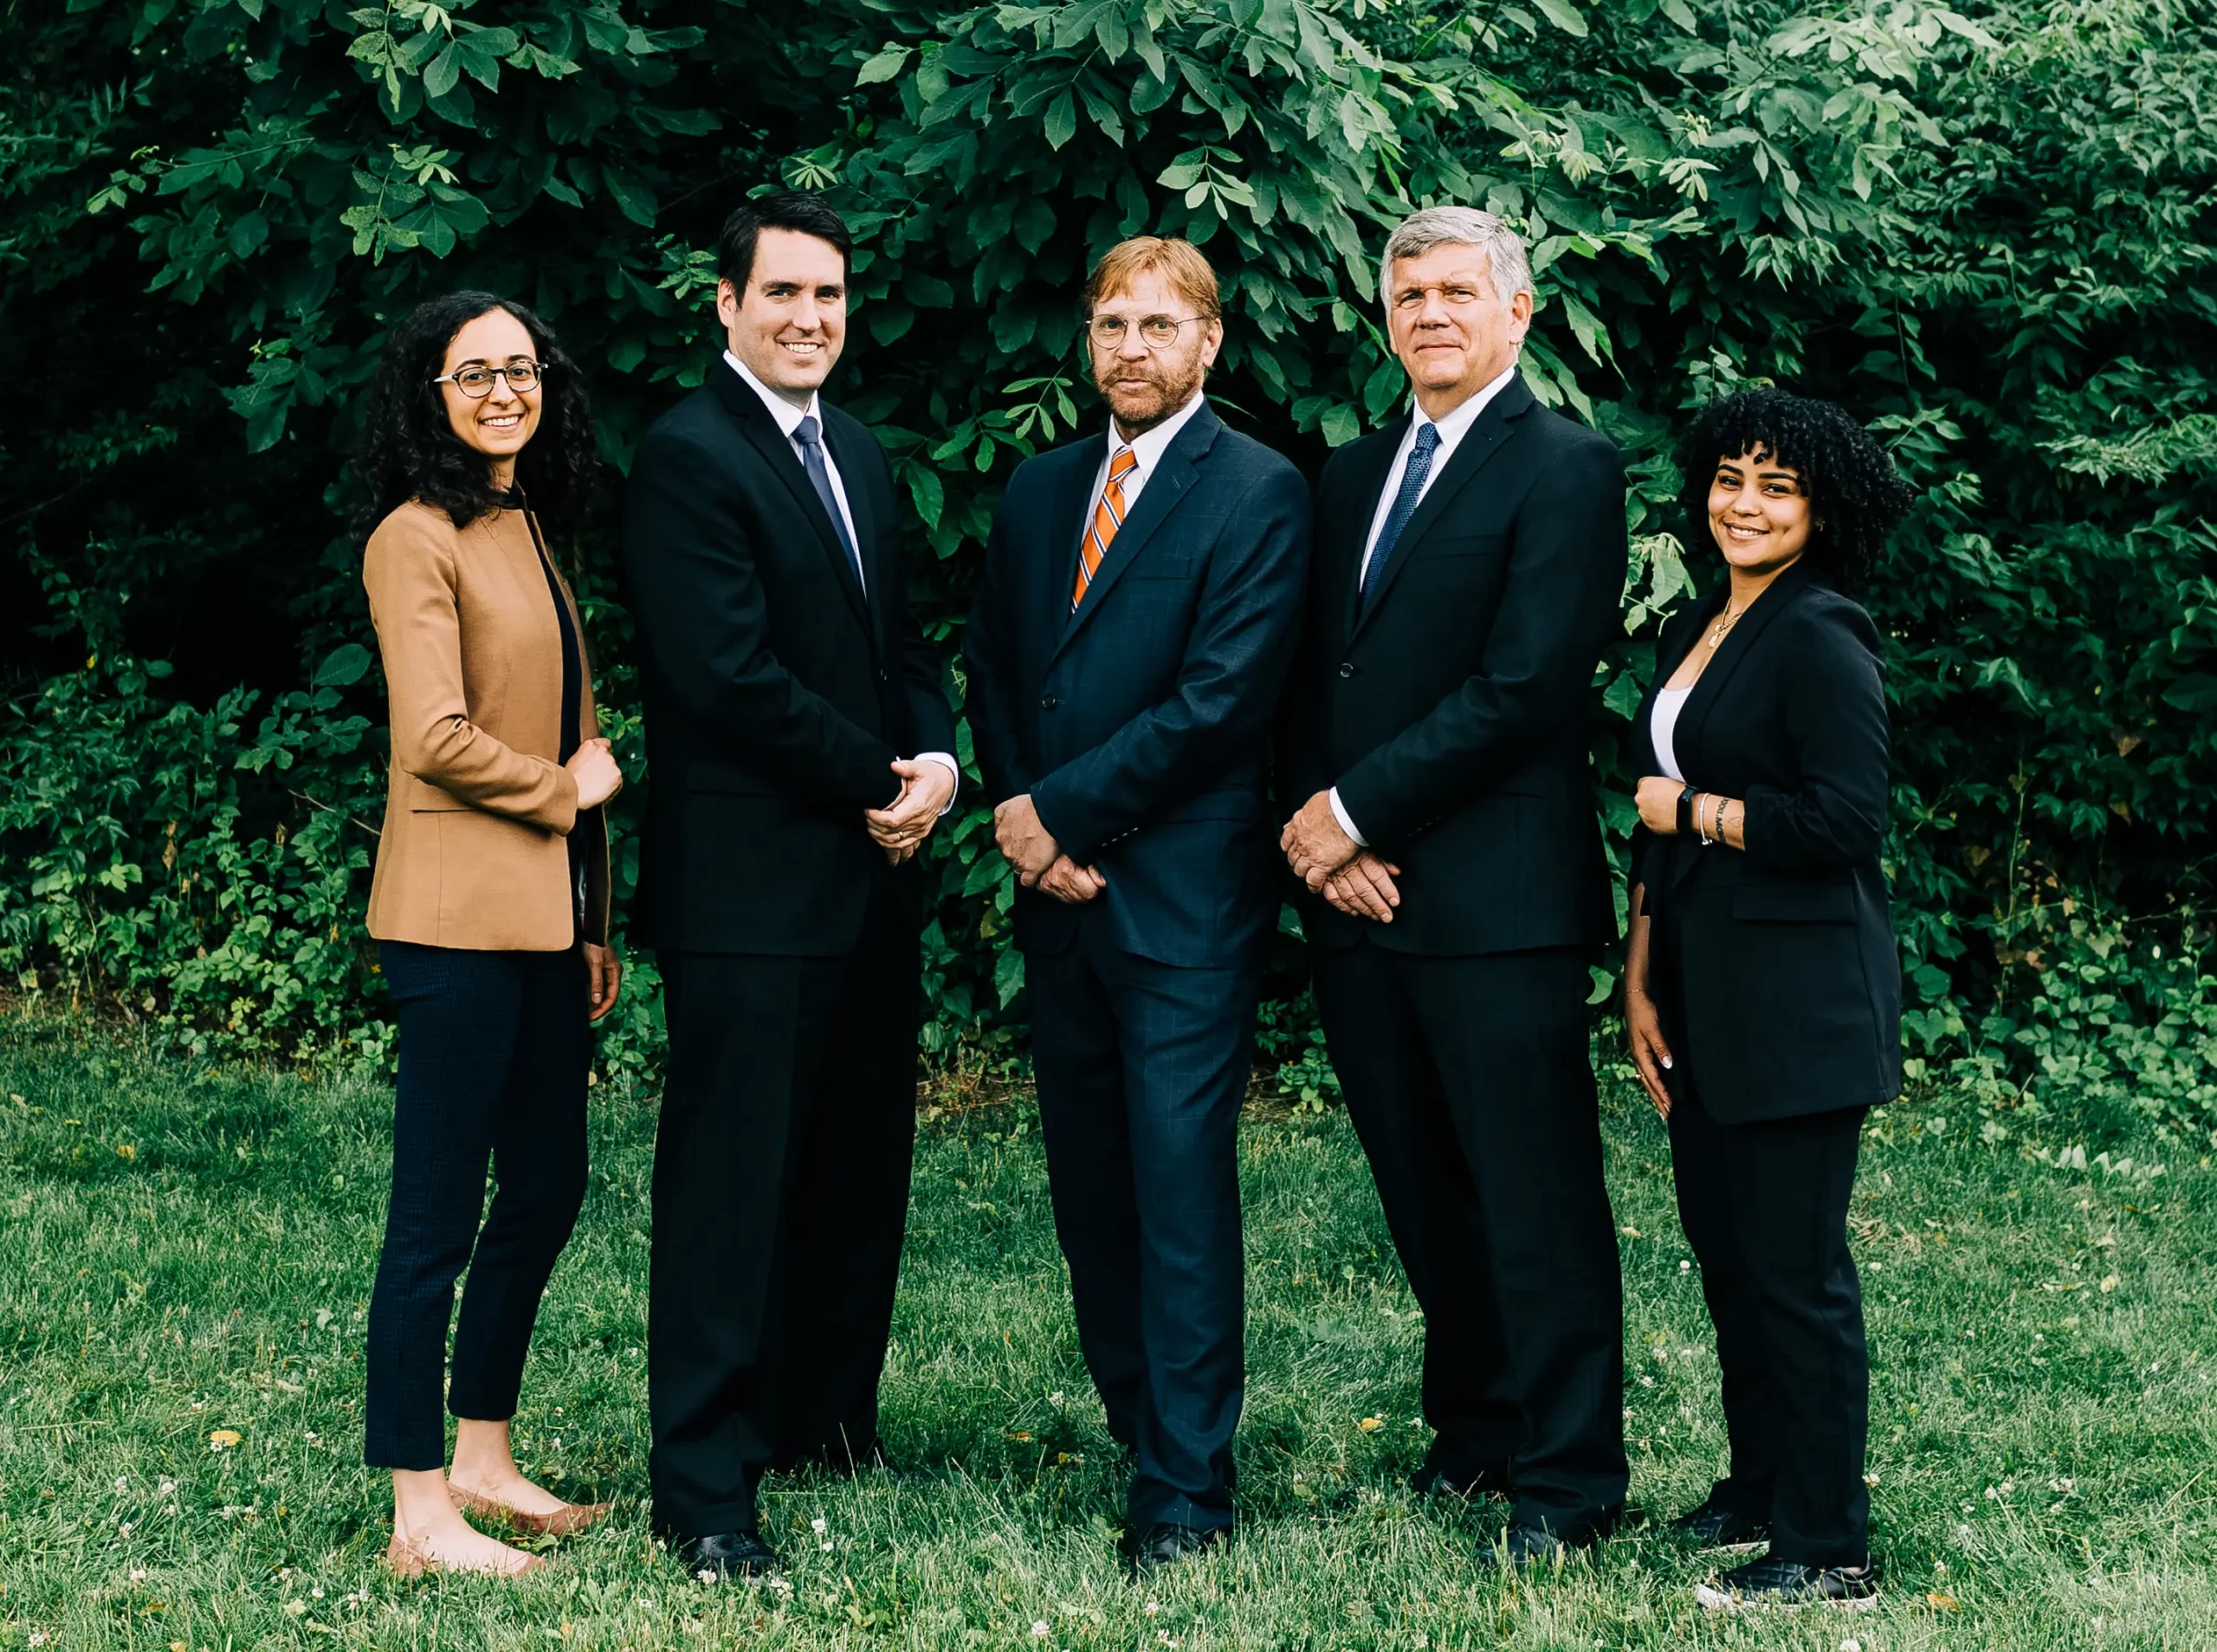 A group photo of the personal injury team at Cornerstone Law Firm, with 3 attorneys and 2 paralegals.